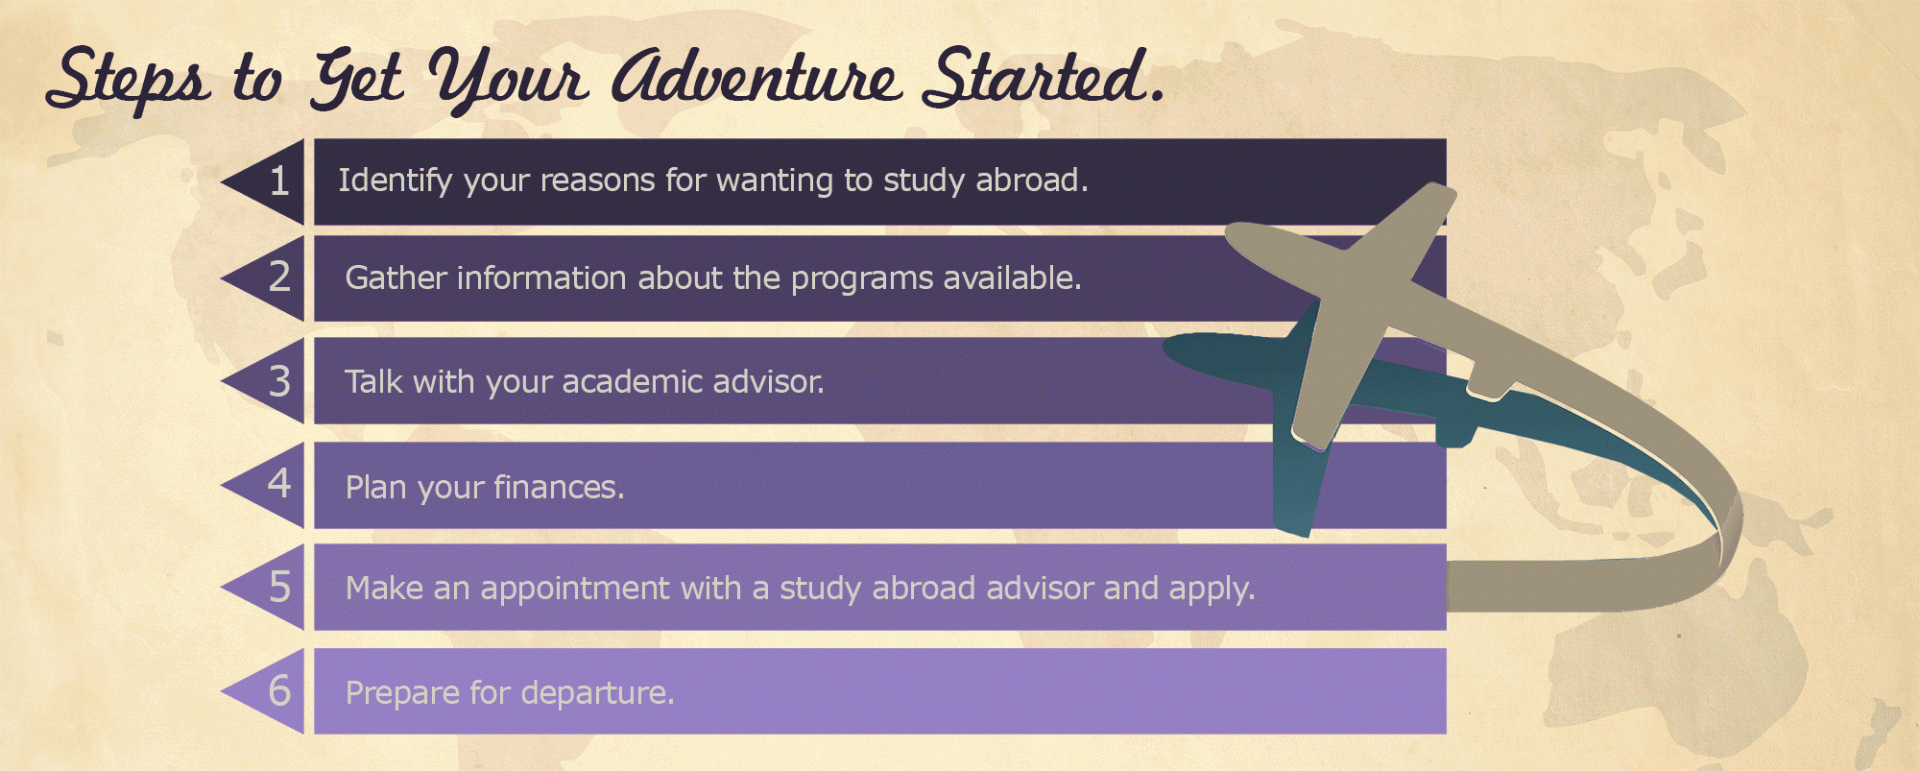 Steps for Studying Abroad